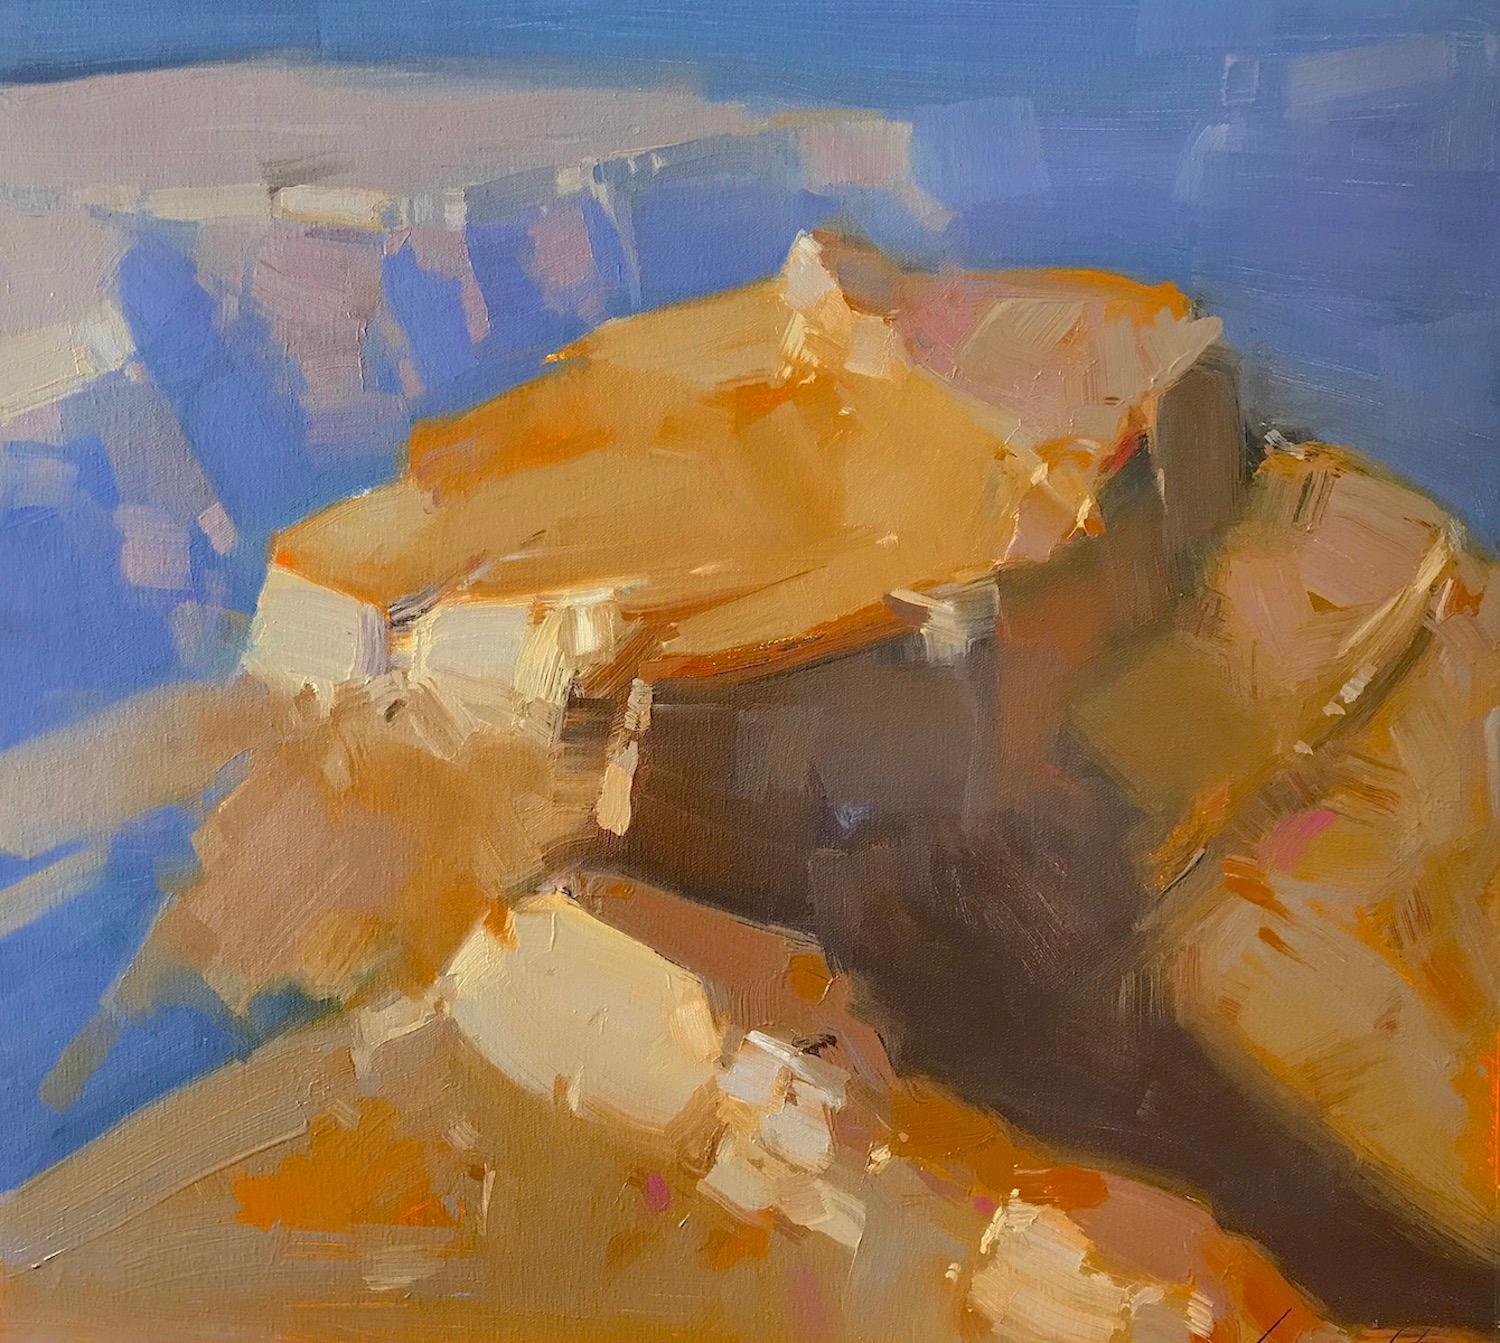 Grand Canyon, Original Oil painting, One of a kind